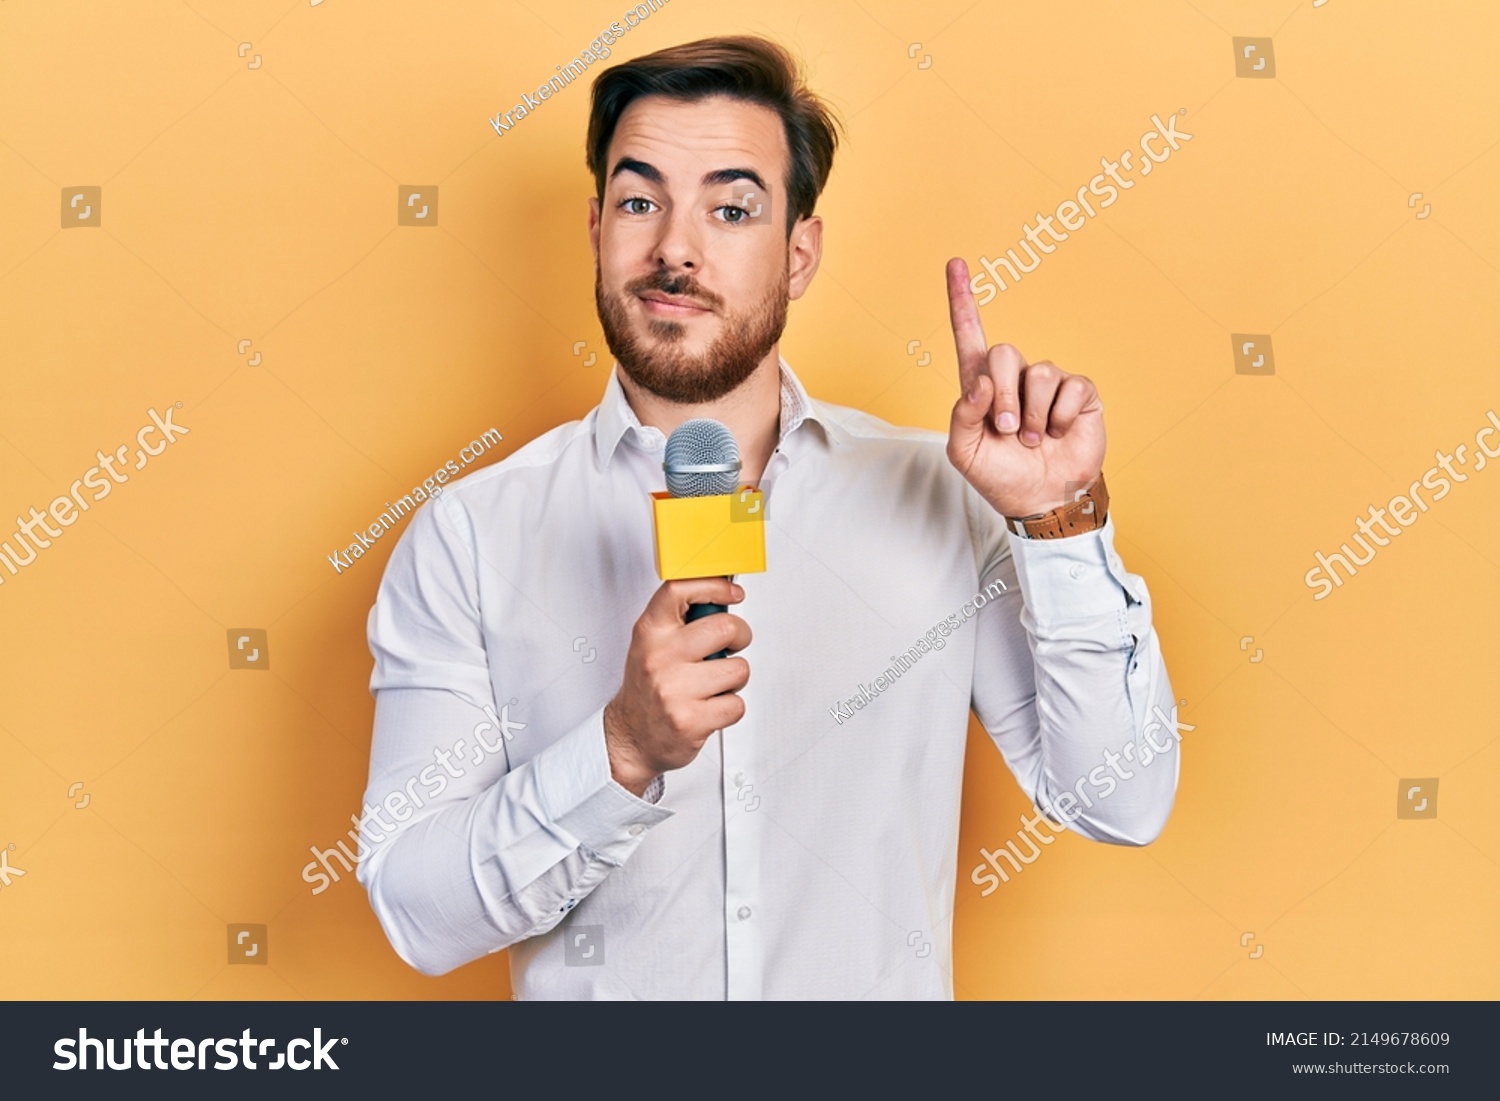 Handsome caucasian man with beard holding reporter microphone surprised with an idea or question pointing finger with happy face, number one  #2149678609